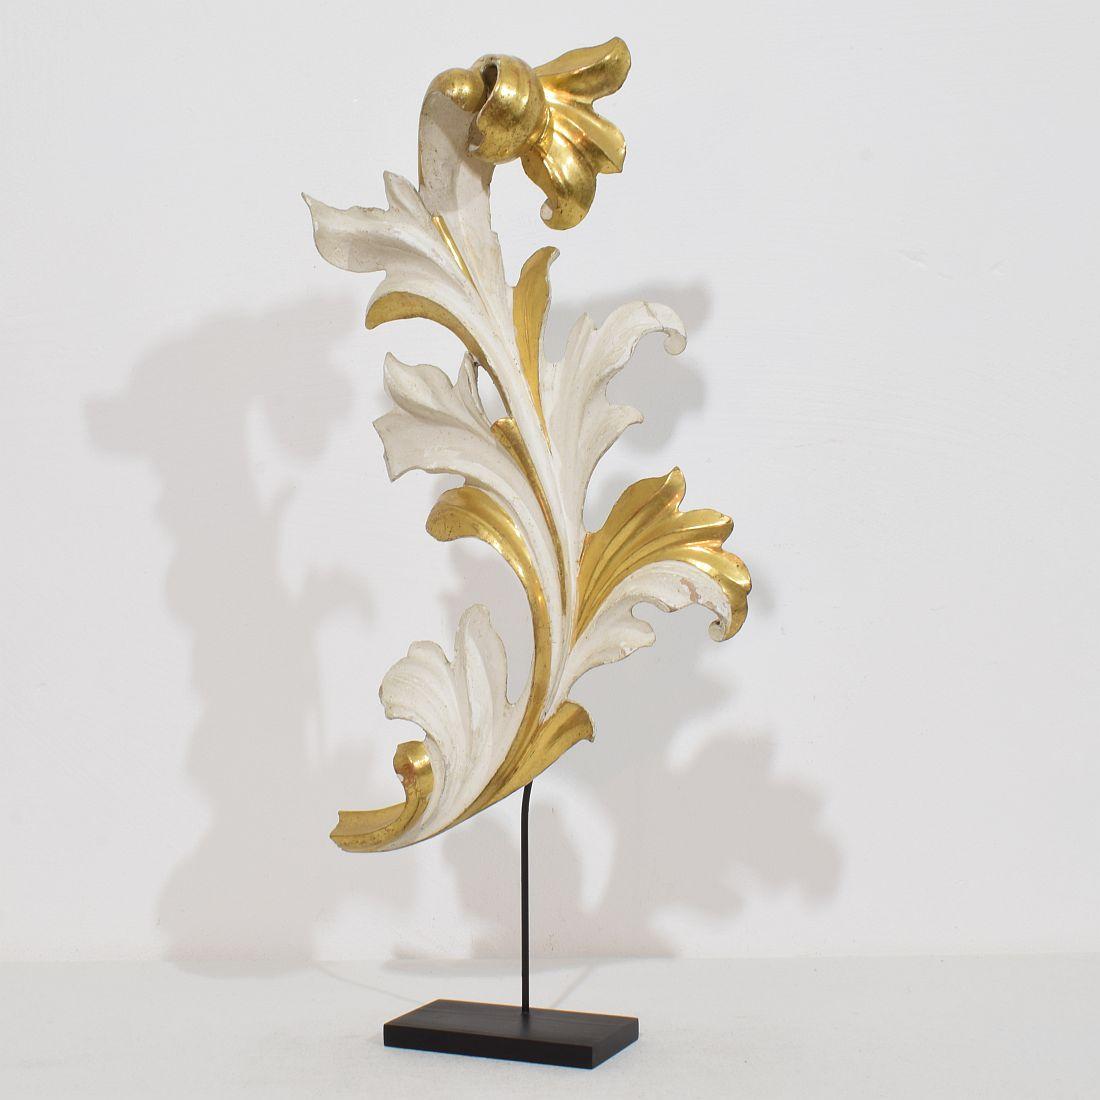 Beautiful handcarved giltwood acanthus leaf curl ornament that once adorned a chapel .Original period piece that due it’s  high age has  a wonderful weathered look.
Italy circa 1780/1850 , weathered,small losses and old repairs.
Measurements are